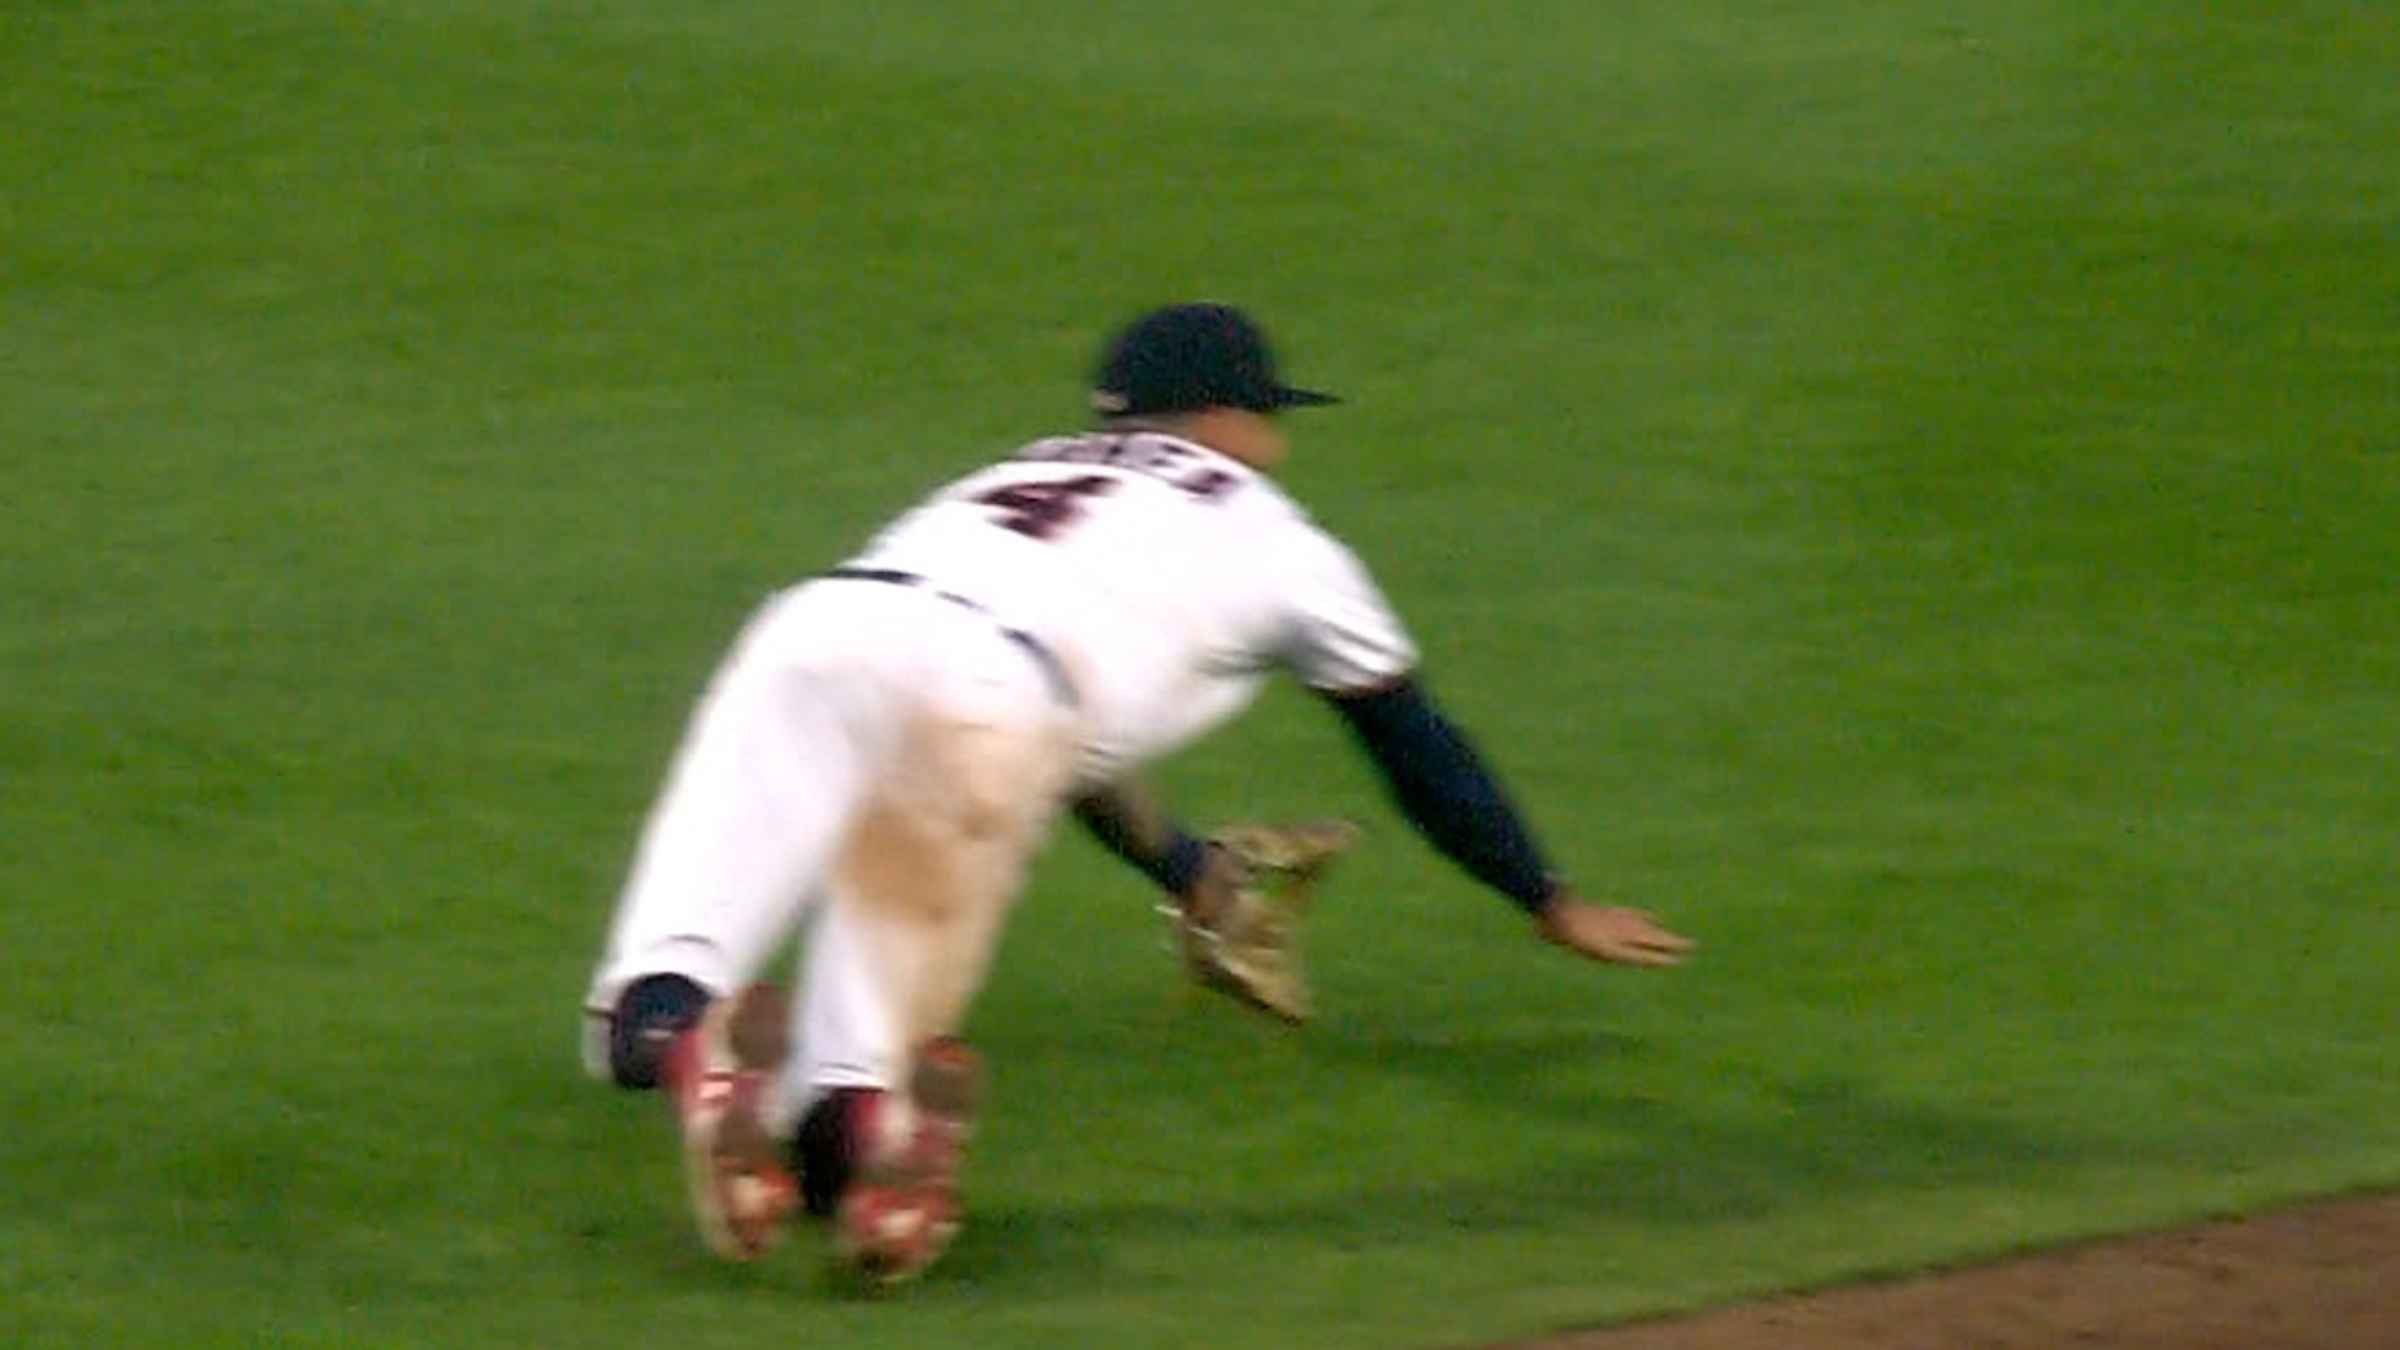 Carlos Correa makes a ridiculous diving stop against Team U.S.A. - The  Crawfish Boxes